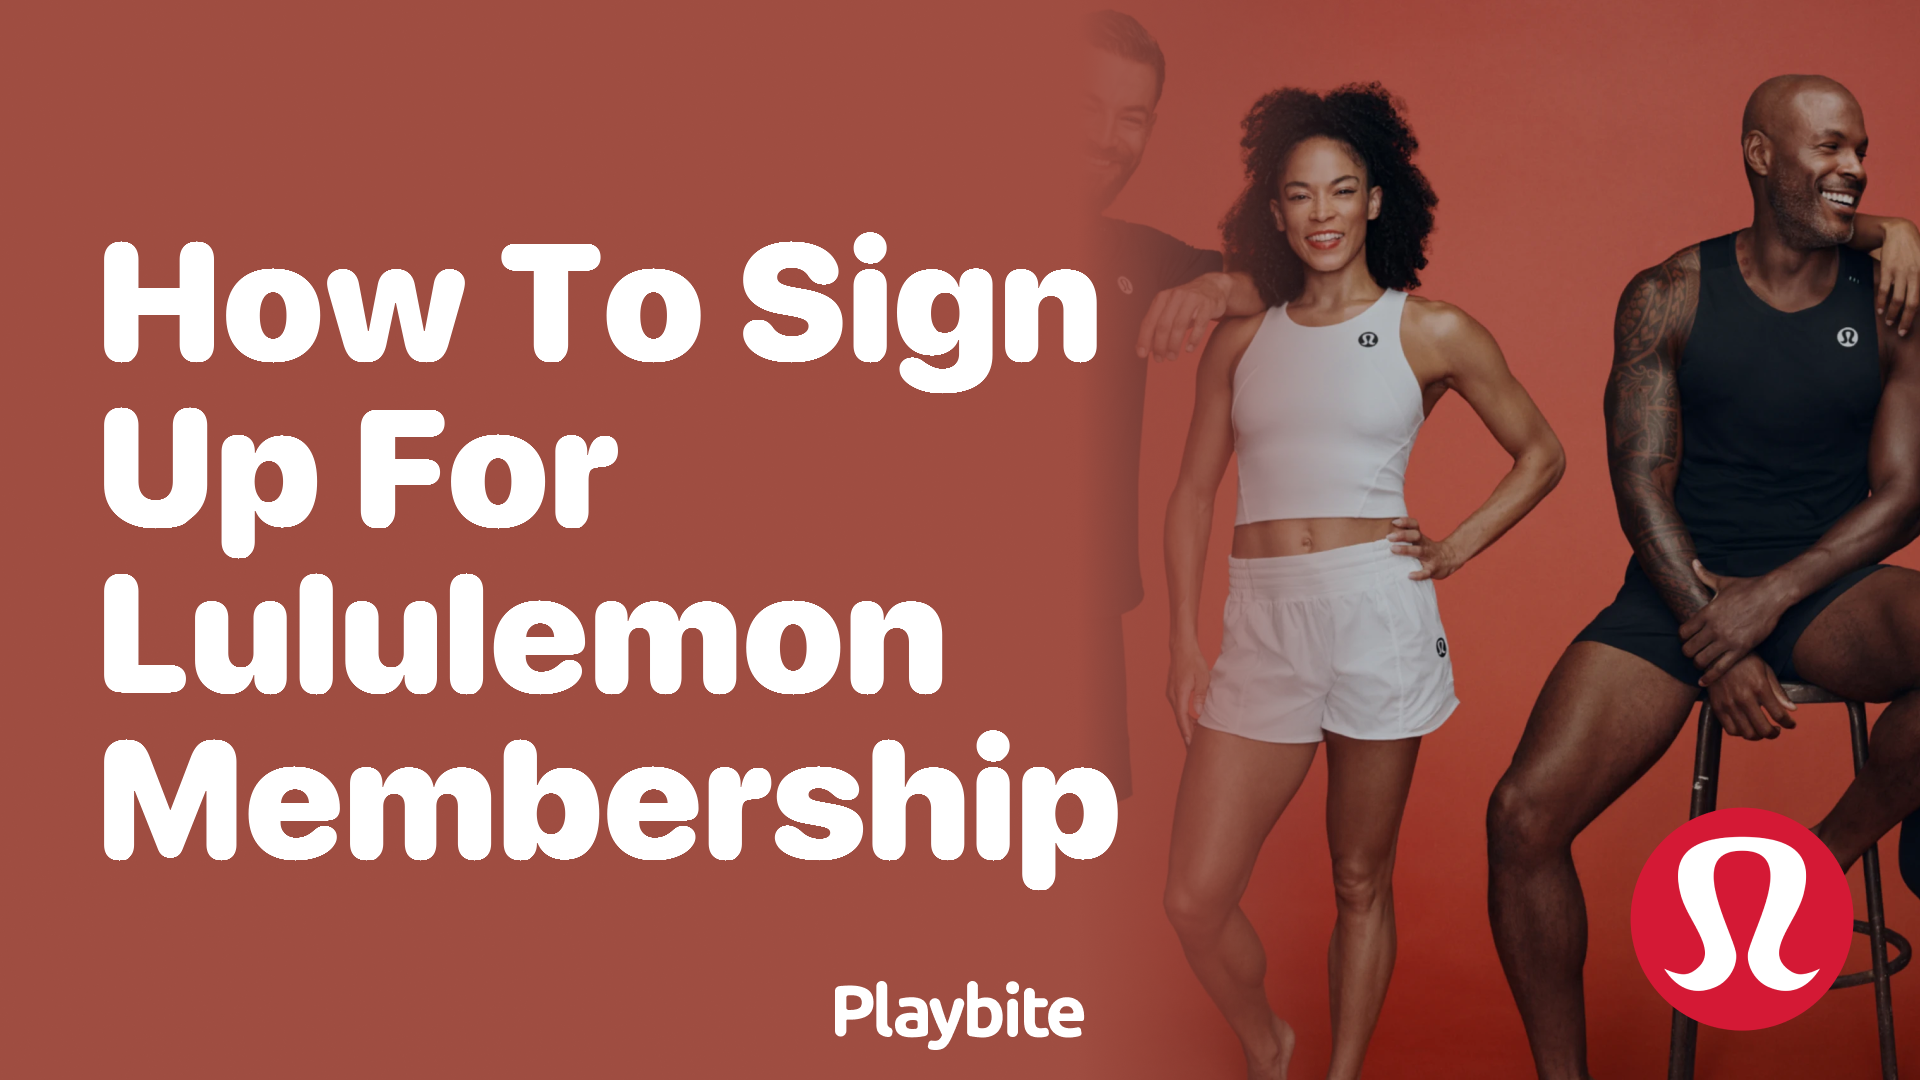 How to Sign Up for Lululemon Membership: A Quick Guide